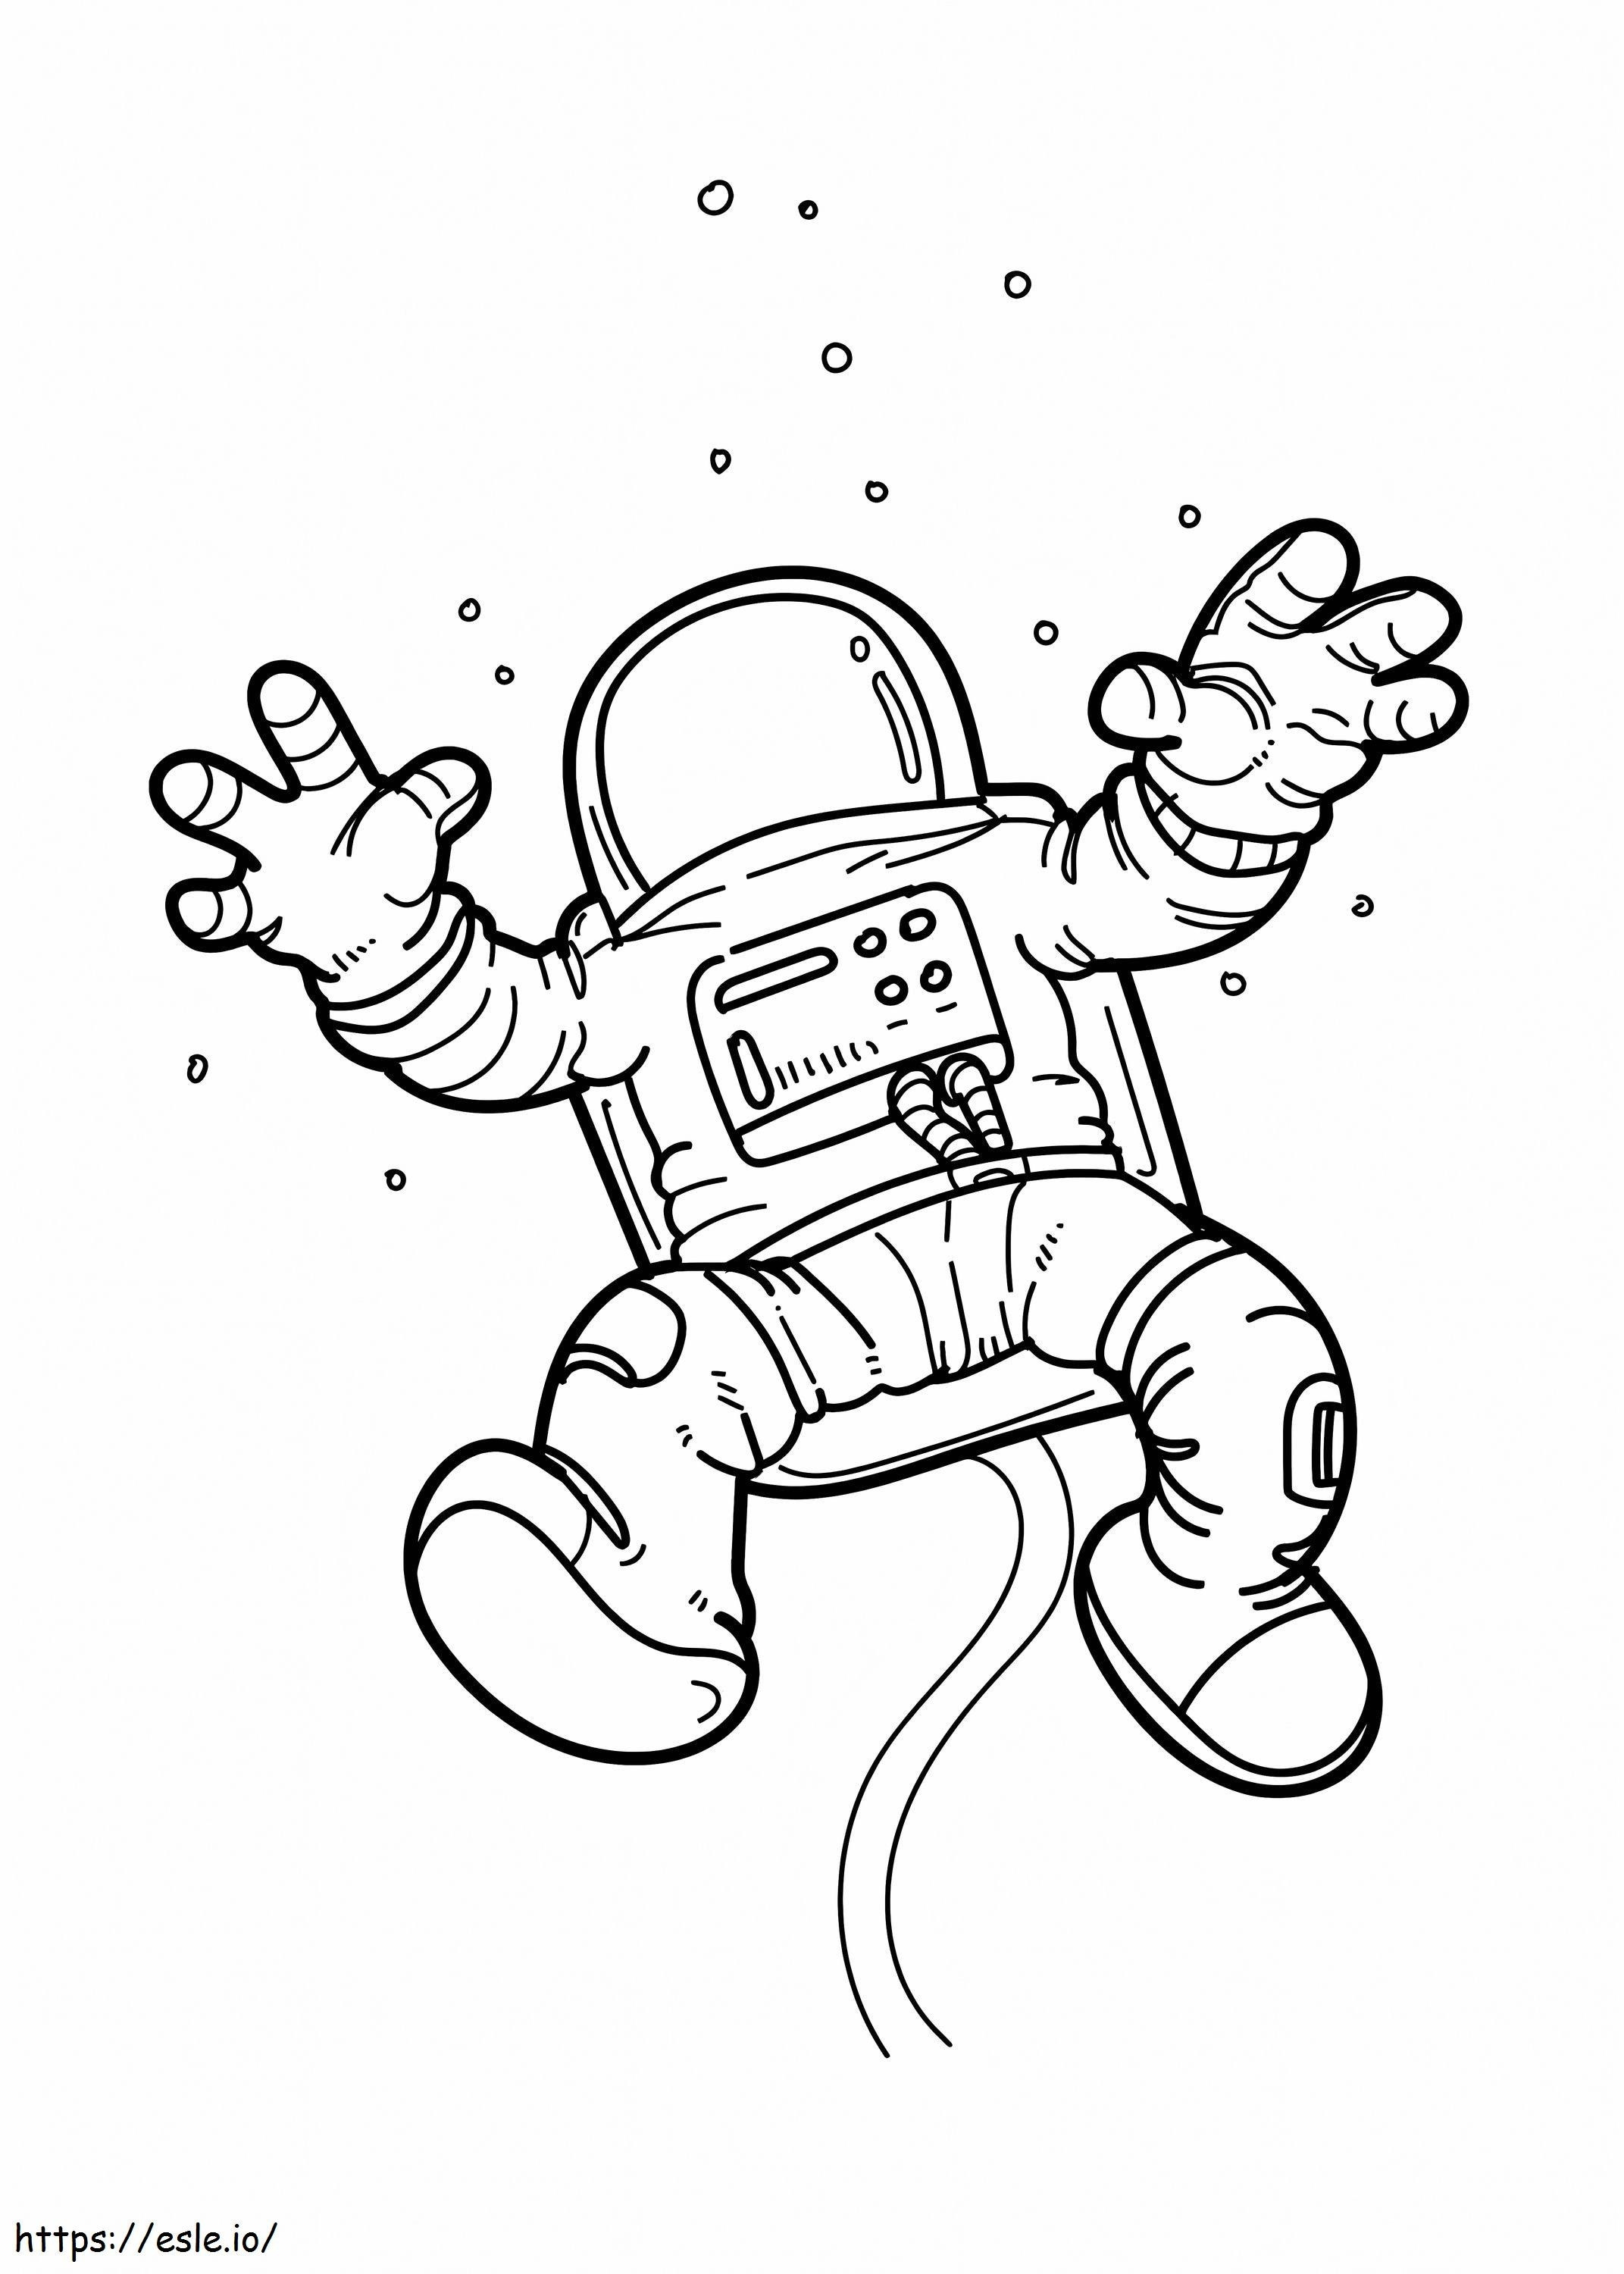 Great Astronaut coloring page